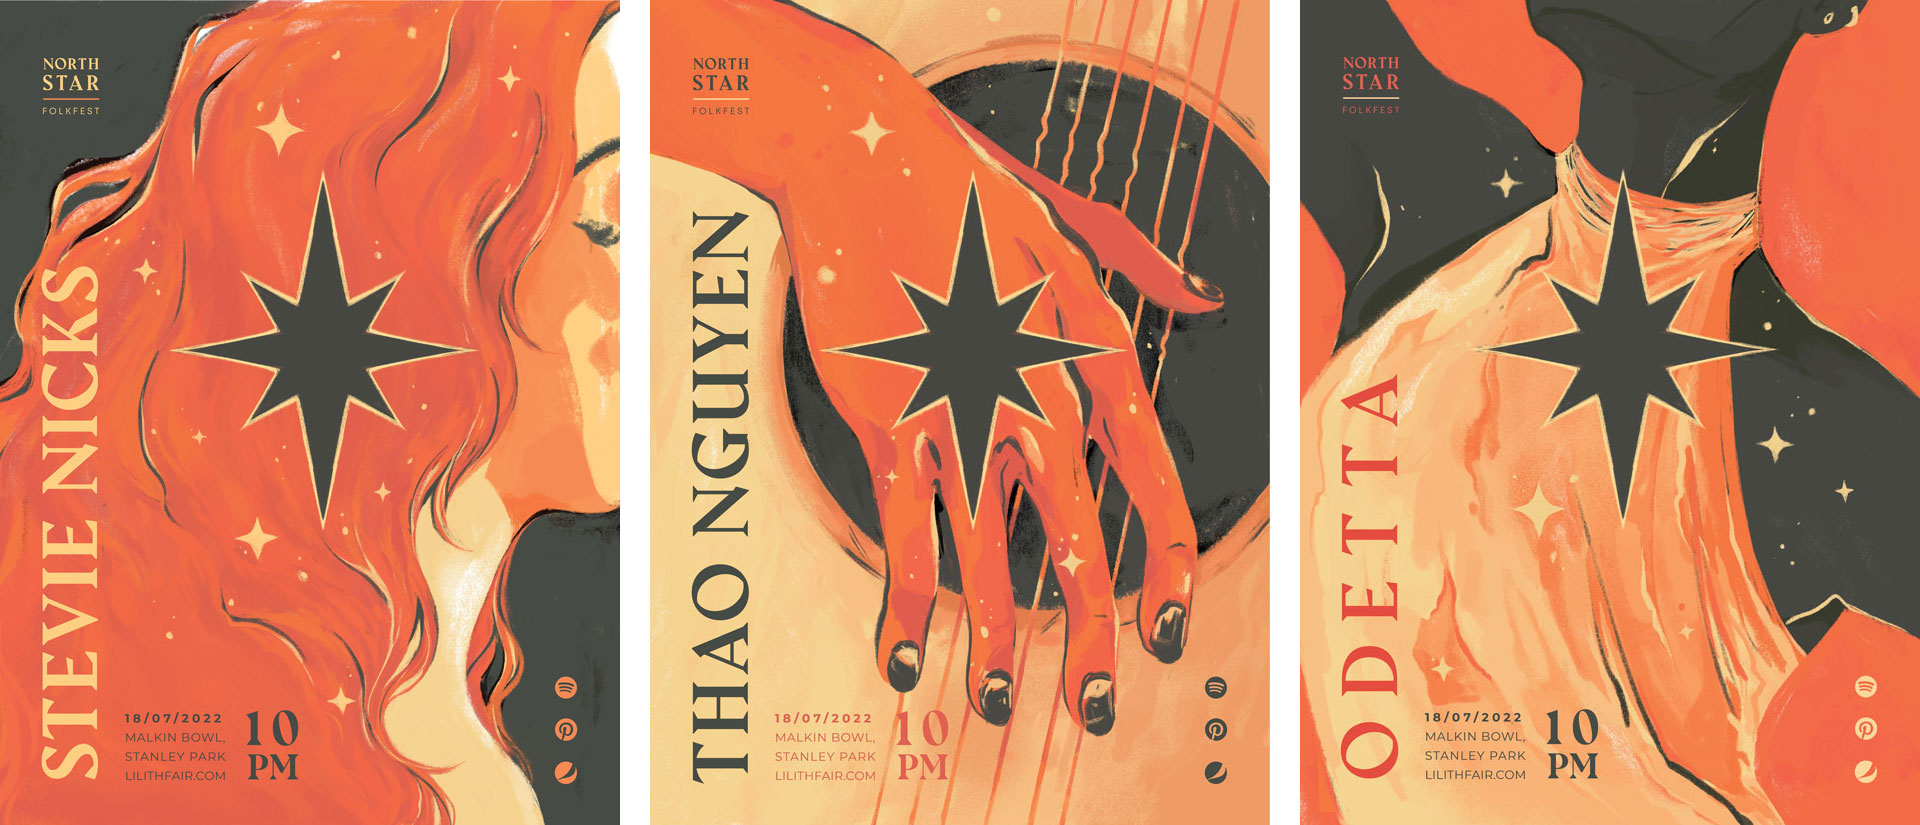 Three illustrated posters featuring close crops of a woman’s face, hands on a guitar, and a woman dancing, overlaid with a star in the centre.